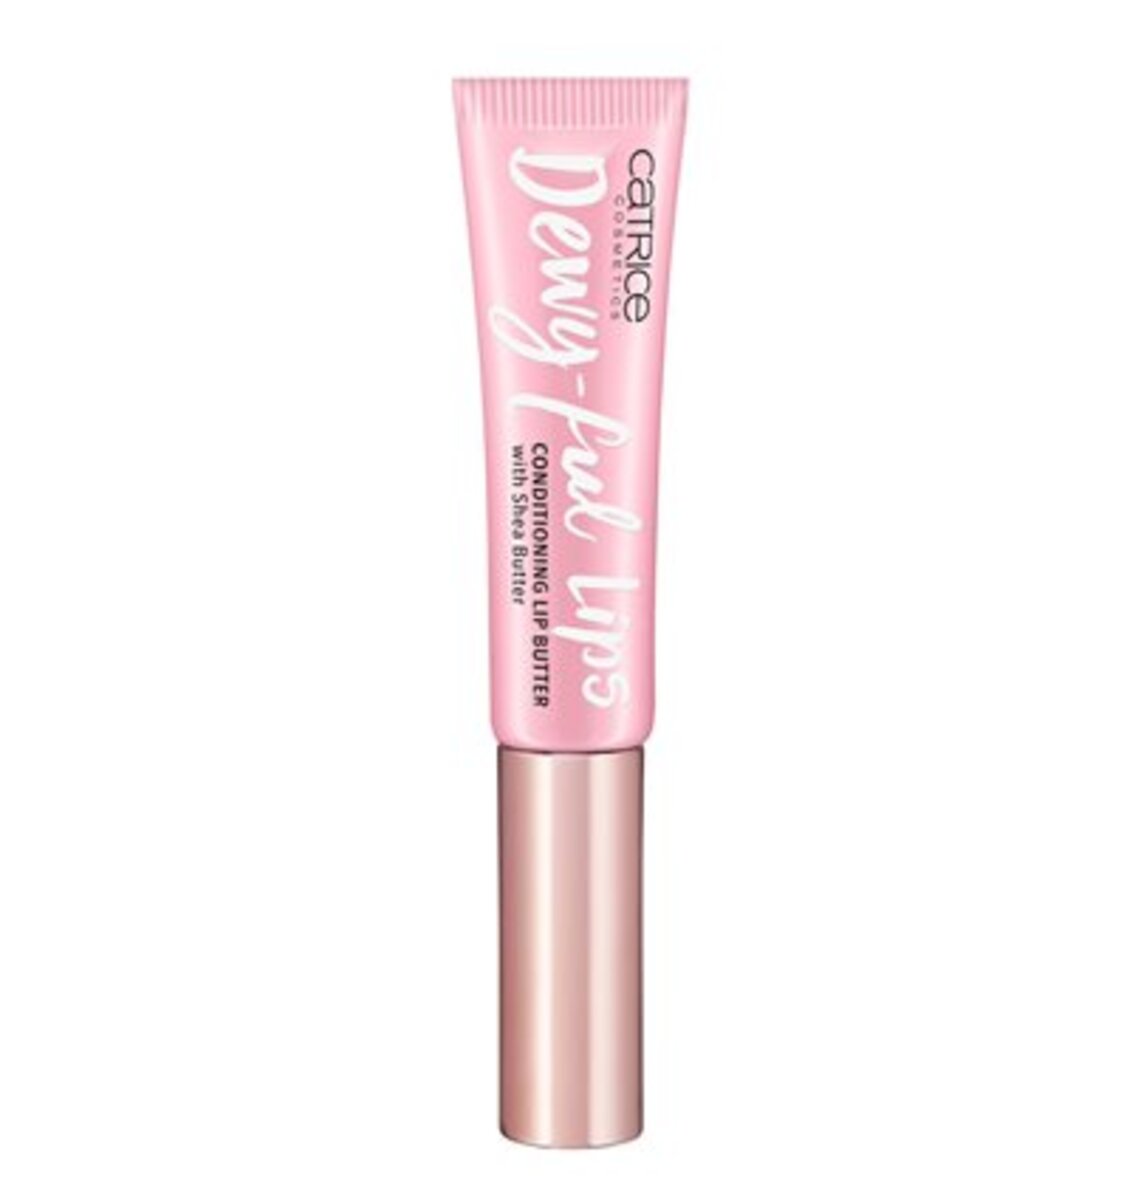 DEWY CONDITIONING LIP BUTTER - OUTLET CATRICE